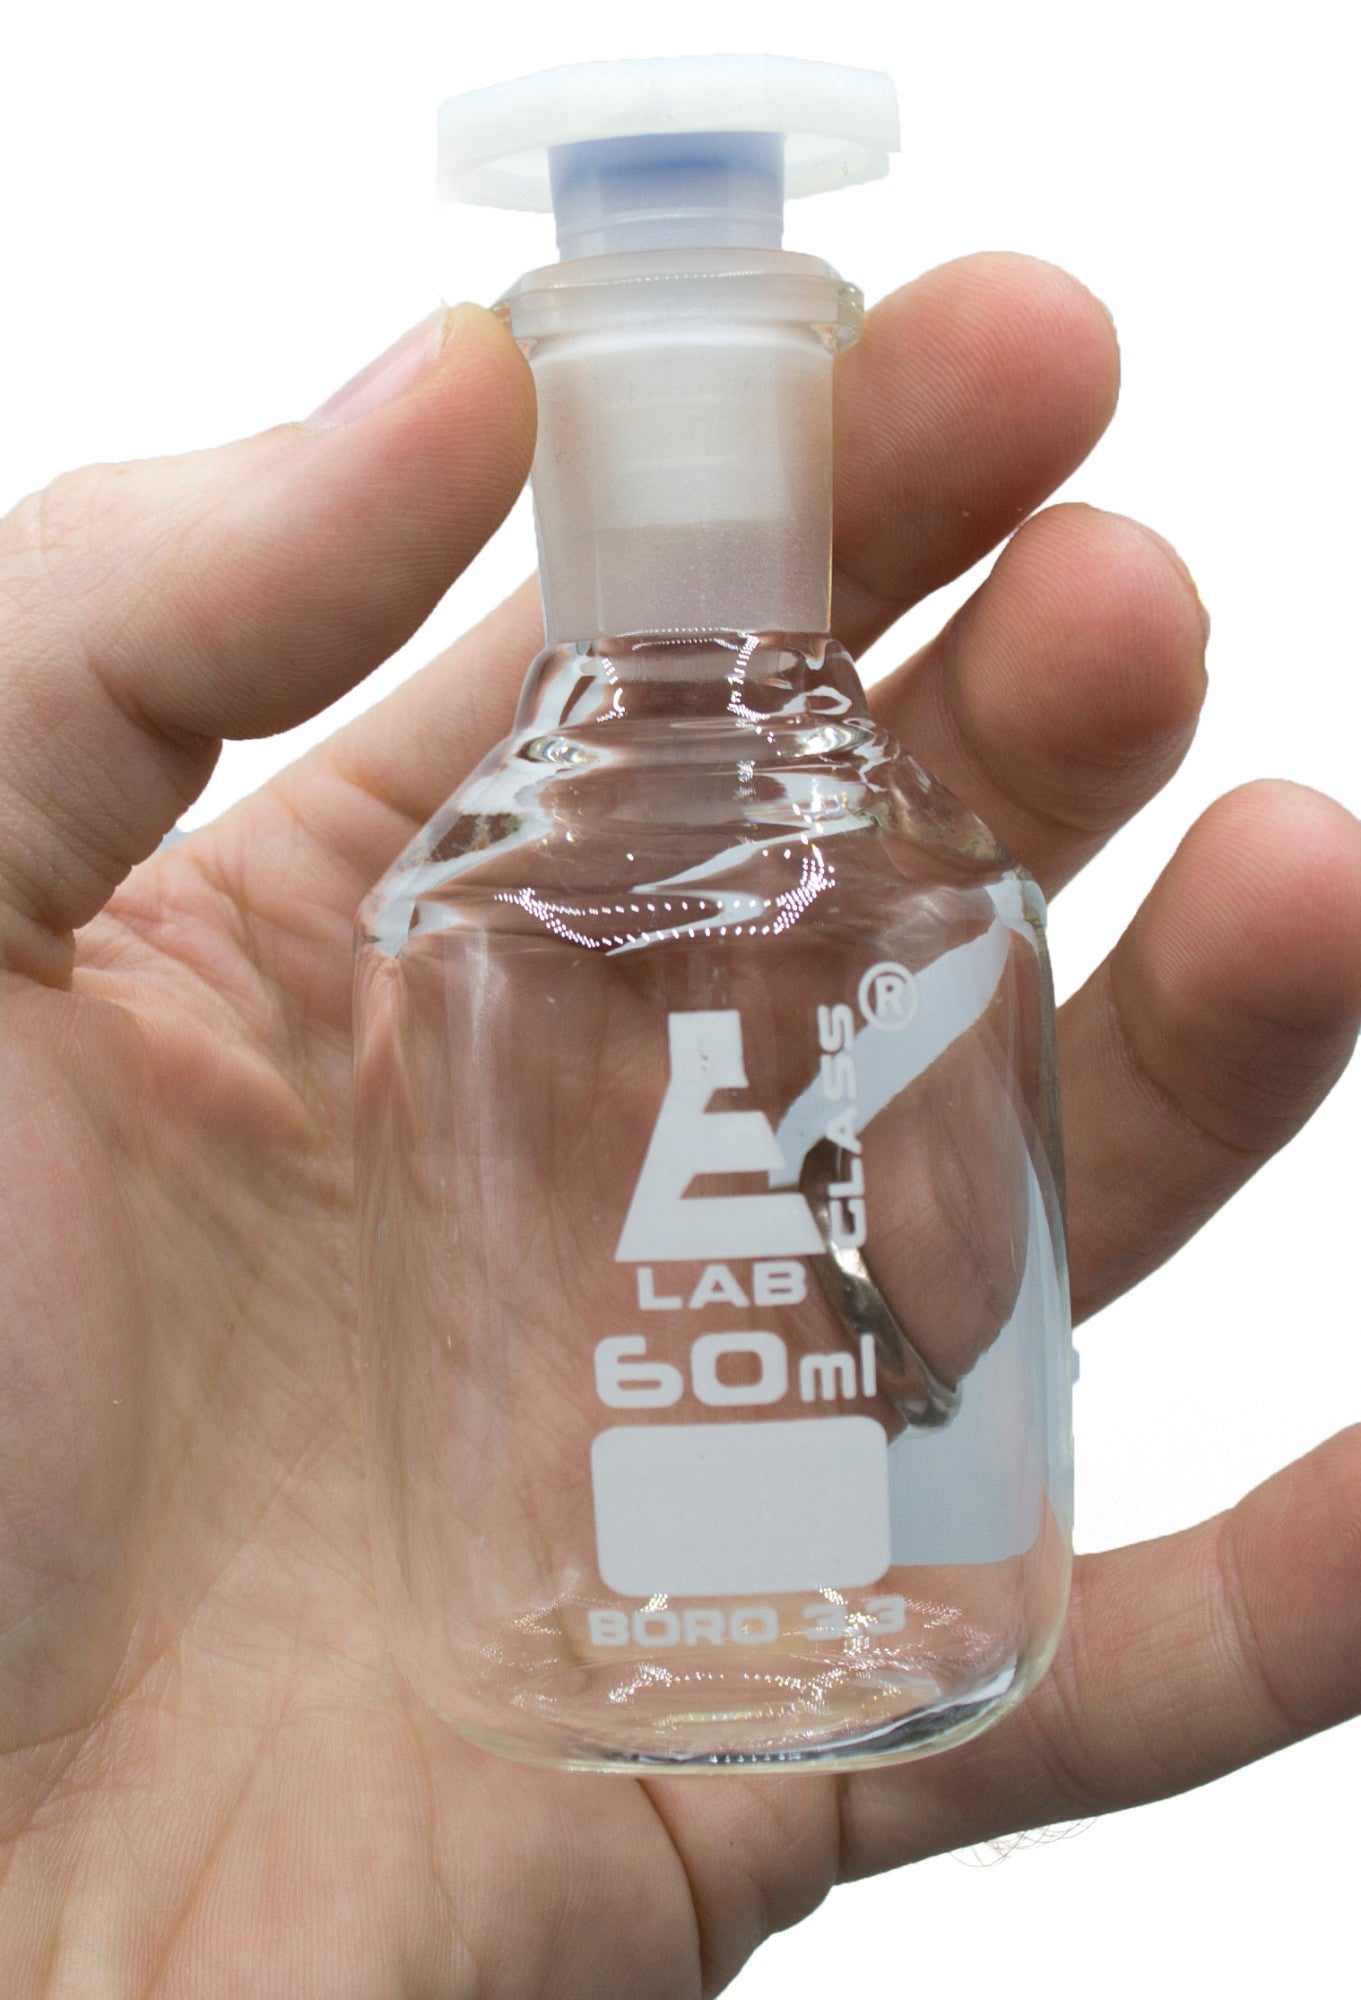 Clear Borosilicate Glass Reagent Bottle with Polyethylene Stopper, 60 ml, Narrow Mouth, Autoclavable